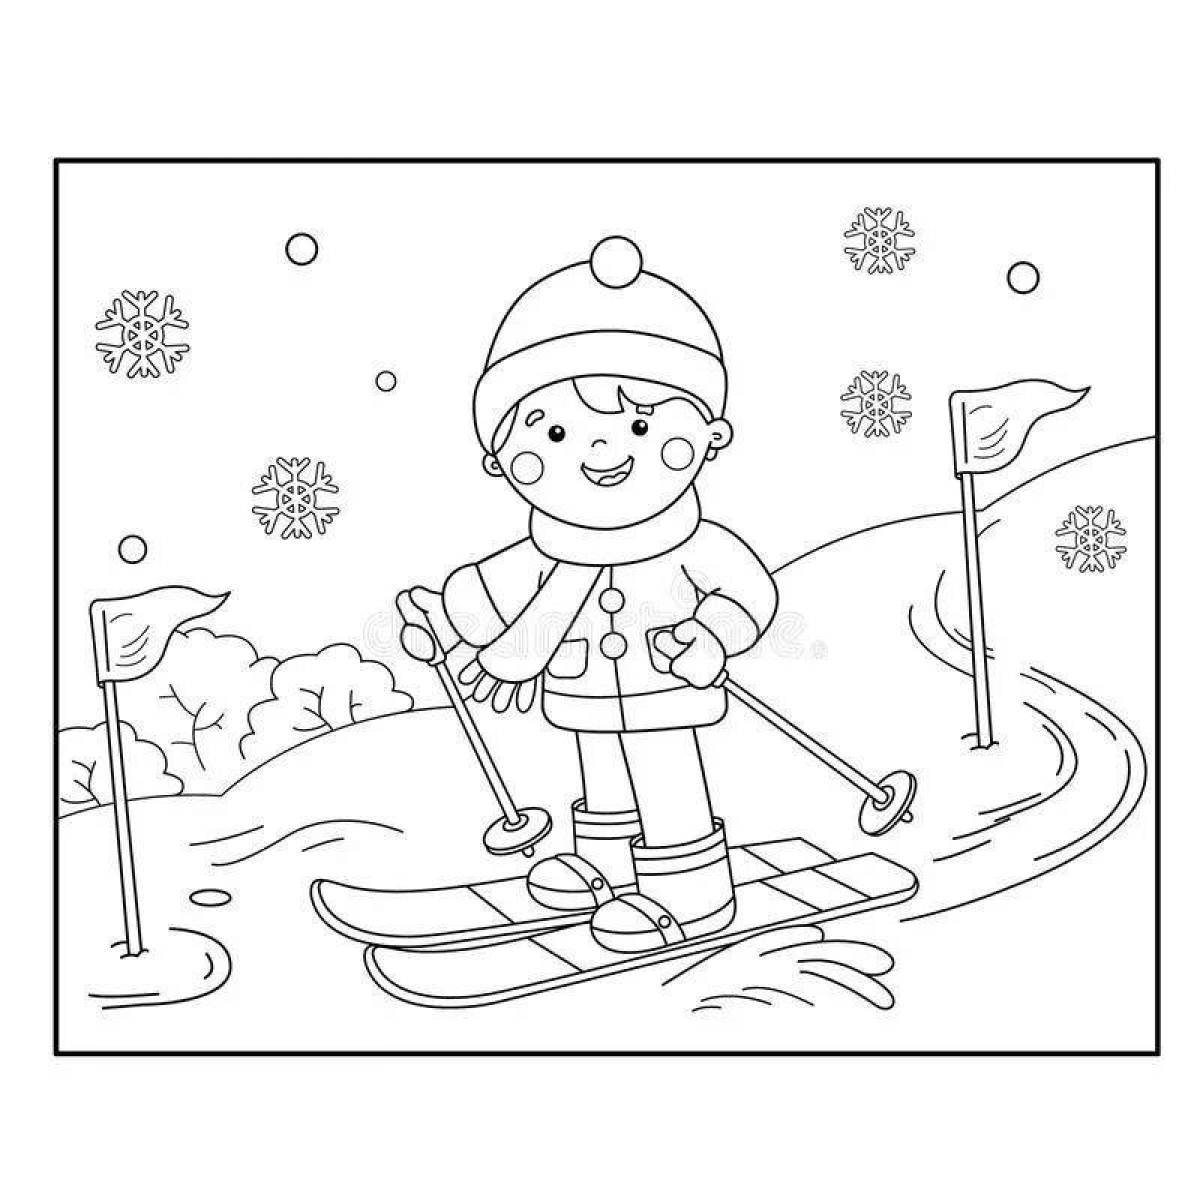 Excited winter sports coloring page